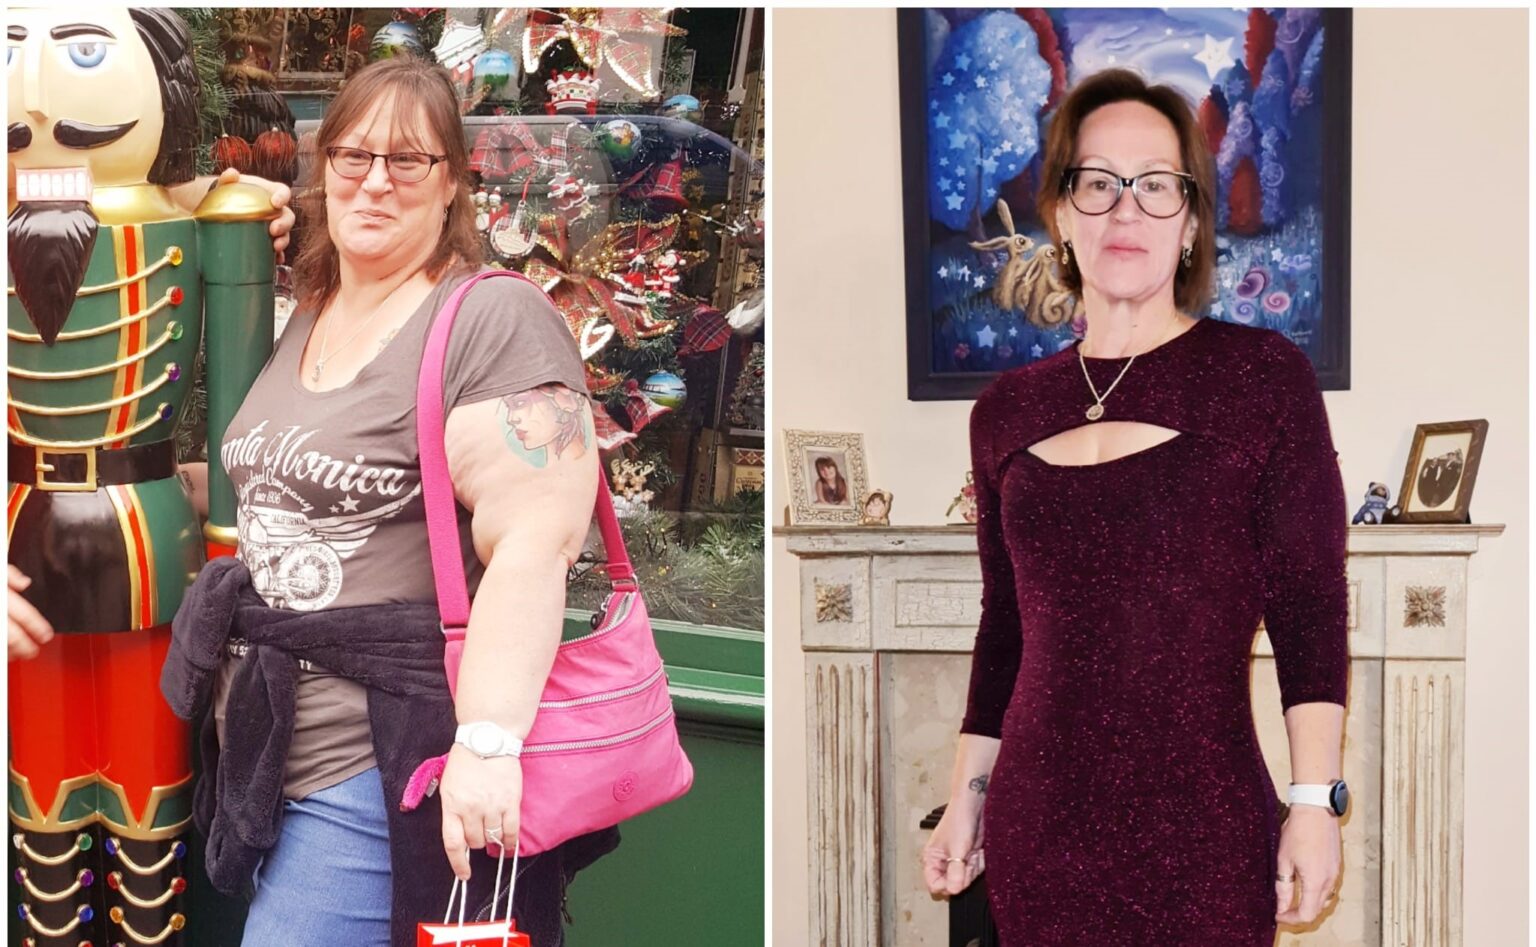 Michelle Geoghan shares her journey of overcoming a 30-year food addiction, despite gastric surgery. Through retraining her brain with BWRT, she found liberation from destructive eating habits and achieved a happy, healthy life.